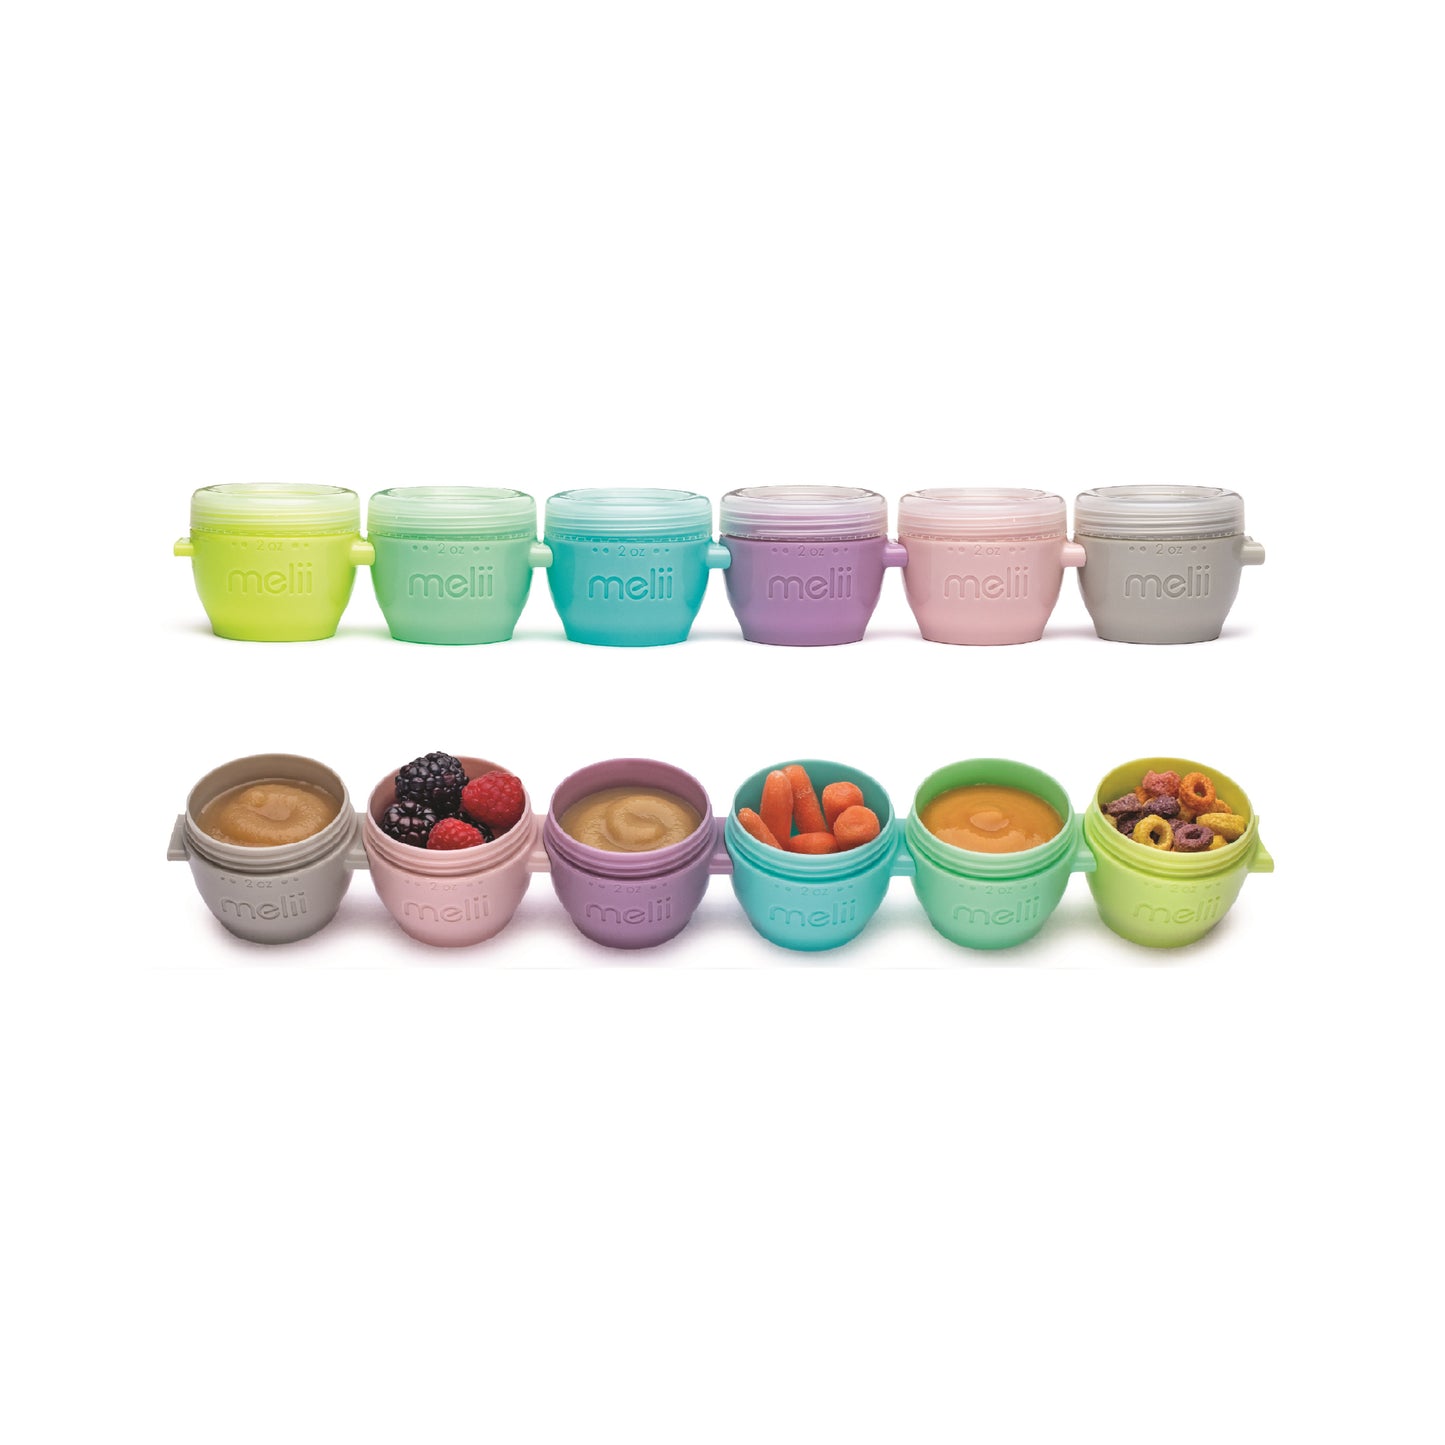 Melii Snap & Go Pods - Airtight & Leakproof Baby Food Containers - Baby Food Storage Pods for Effortless Mealtime, 2oz, Set of 6